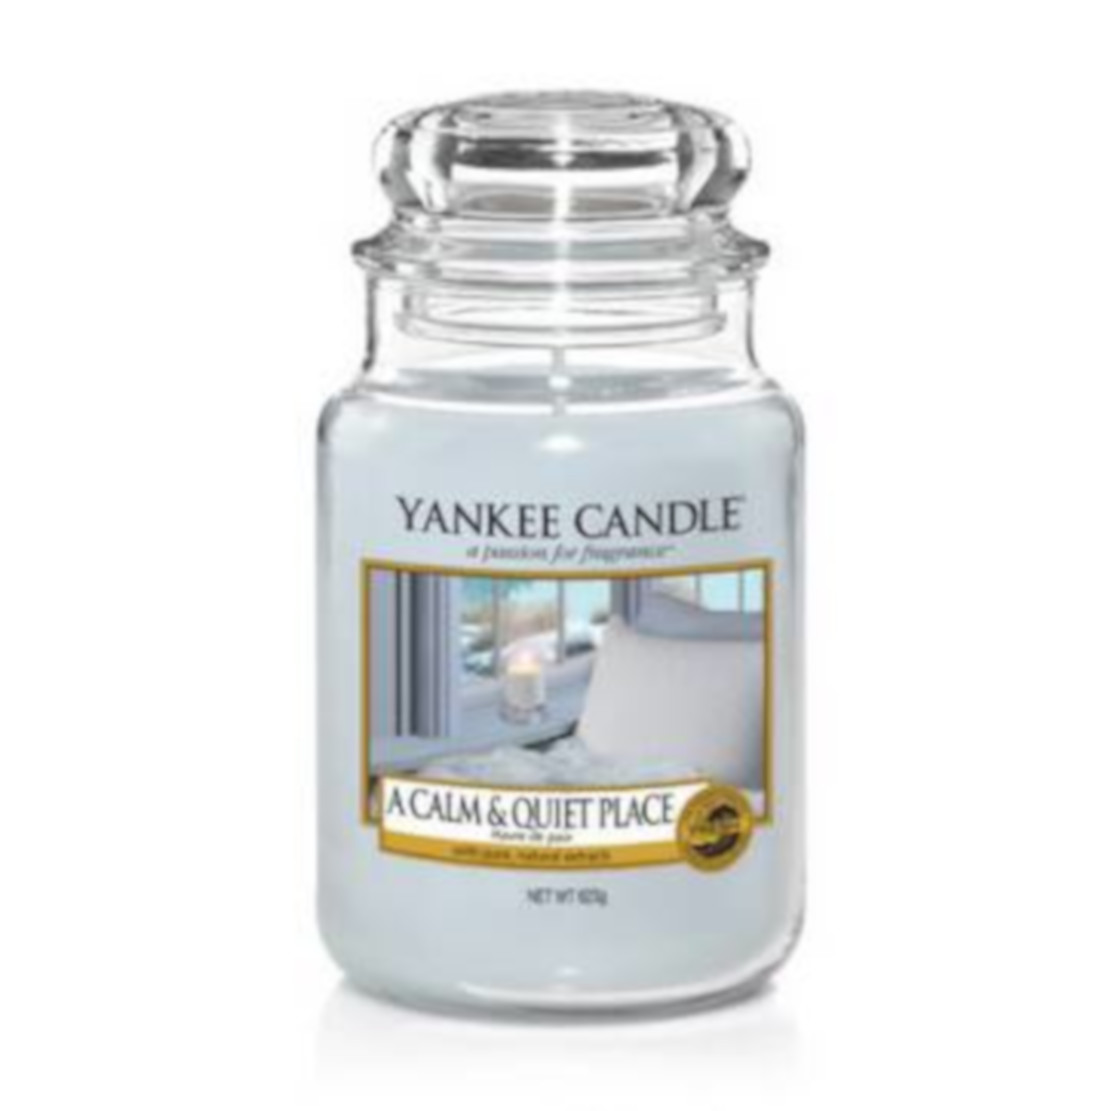 Yankee Candle A Calm and Quiet Place Large Jar